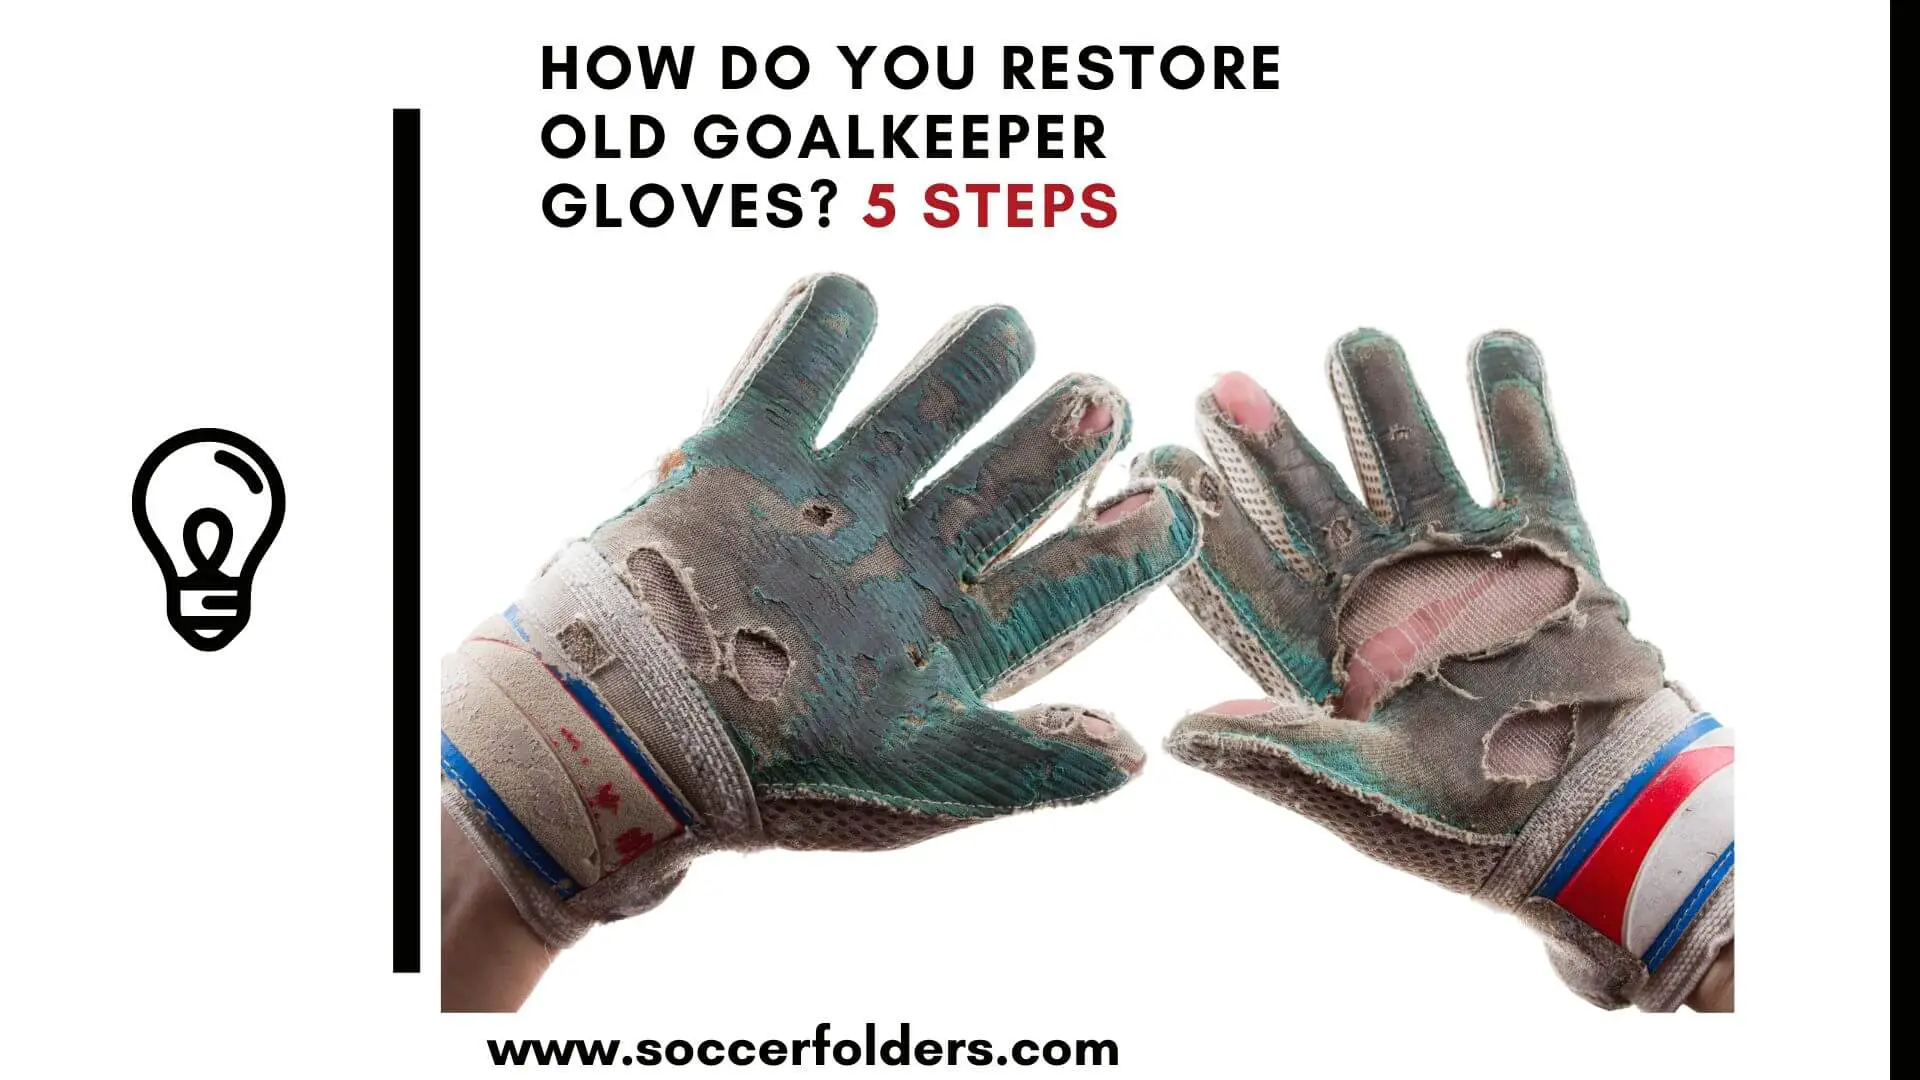 How do you Restore old Goalkeeper Gloves - Featured image